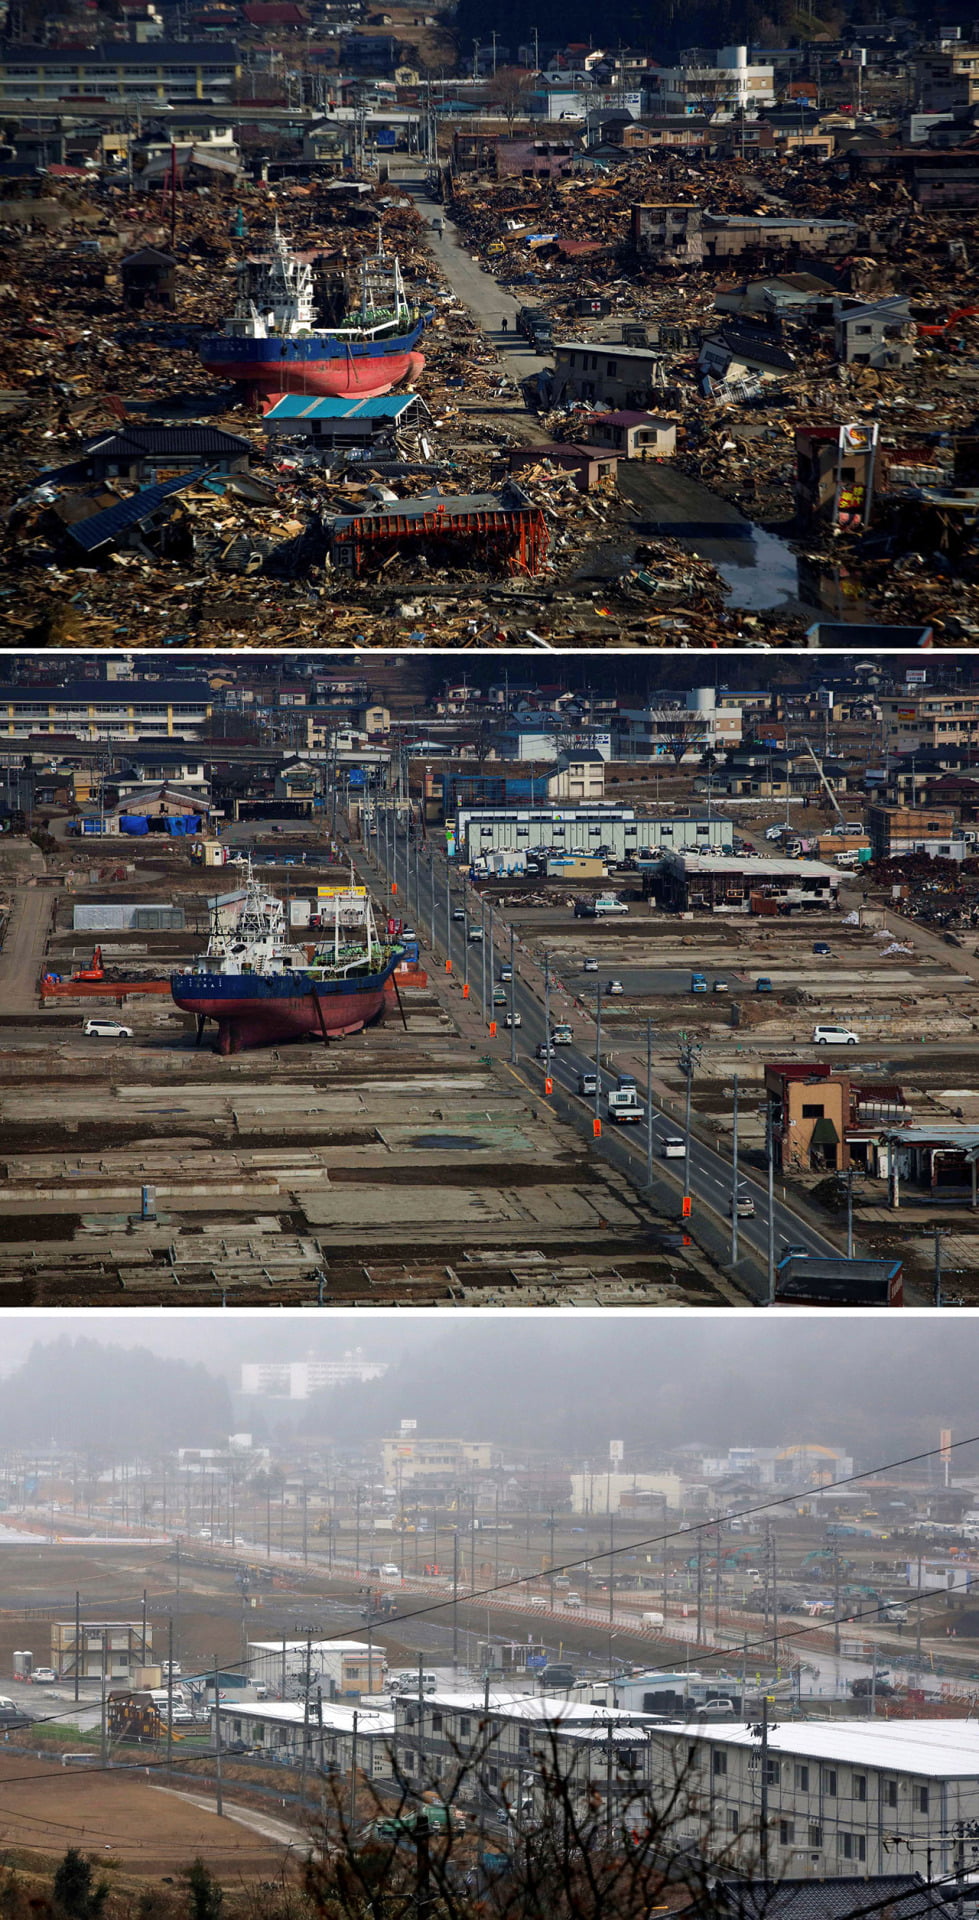 In this combination photo, a ship washed away by the tsunami sits in a destroyed residential neighborhood in Kesennuma, northeastern Japan, on March 28, 2011, top, the same ship sits on the same spot on Thursday, Feb. 23, 2012, center, and the ship, that was dismantled in 2013, is no longer there on Sunday, March 6, 2016. Five years after the disaster, construction work is clearly underway but far from done. Rebuilt roads stretch to the horizon between still largely vacant expanses. It is a massive undertaking to raise the ground level of entire neighborhoods, to better protect them from inundation, before rebuilding from scratch. (AP Photo/David Guttenfelder and Eugene Hoshiko)